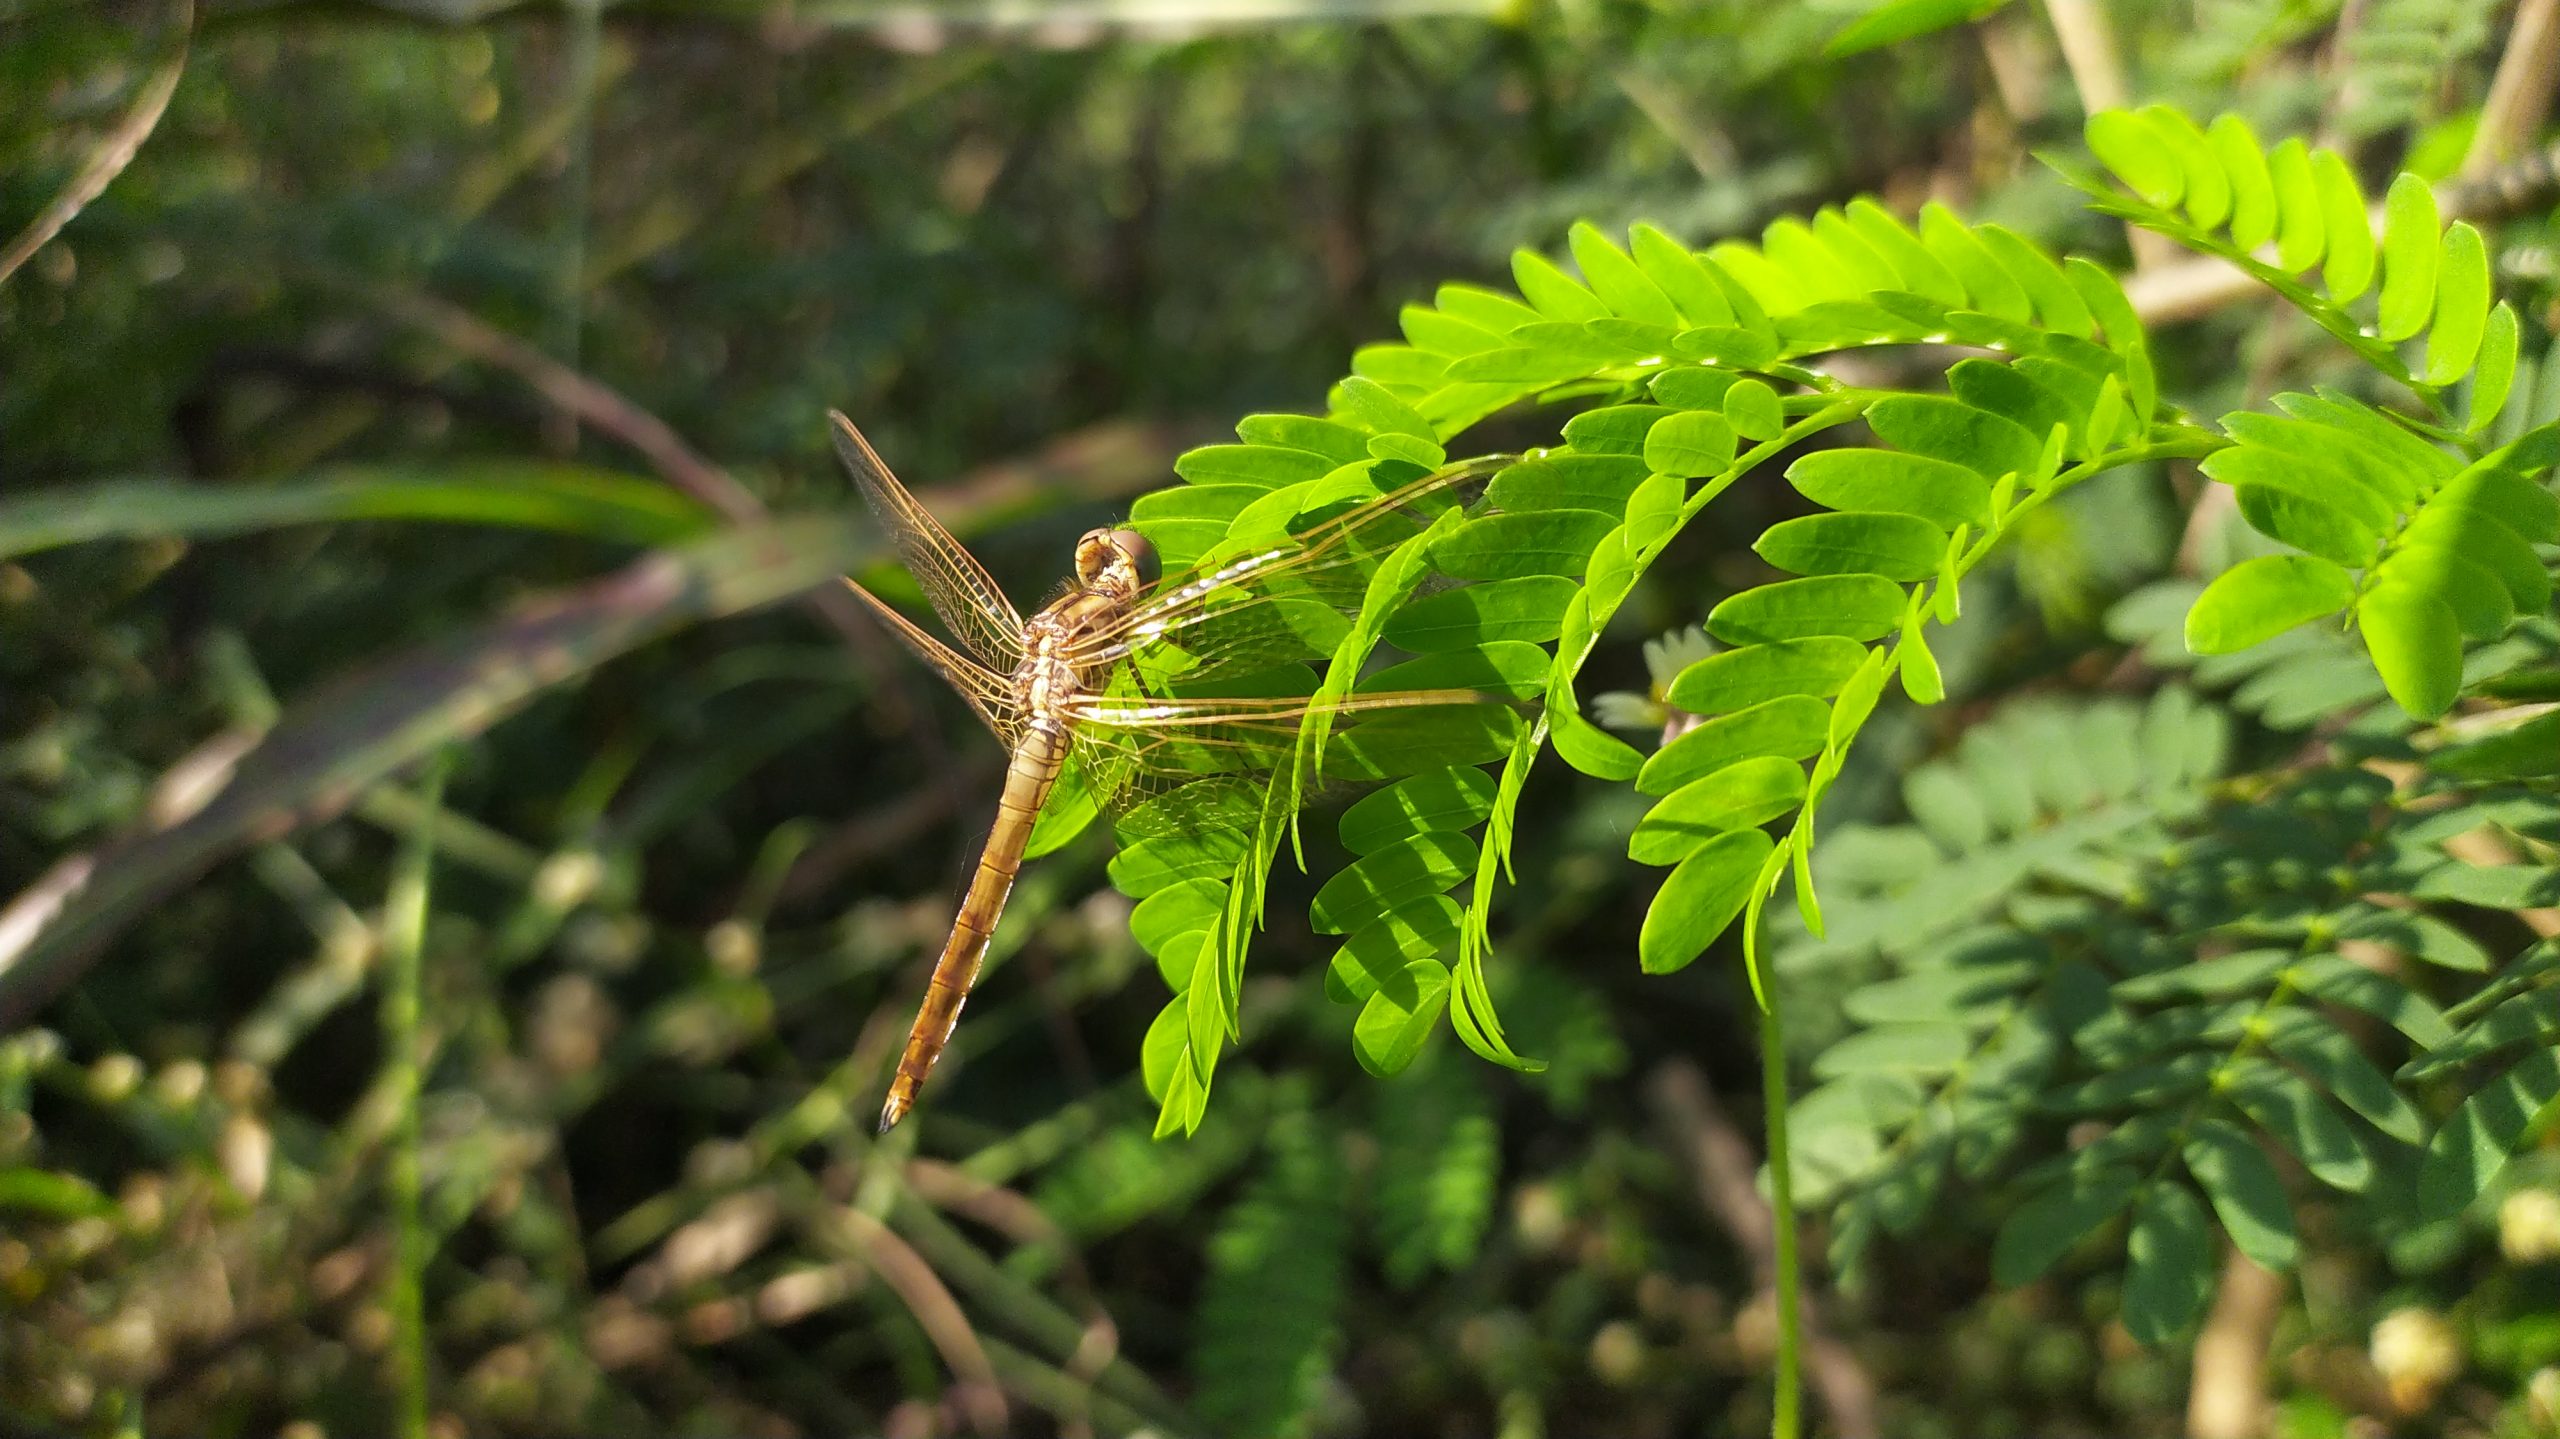 Dragonfly on leaves